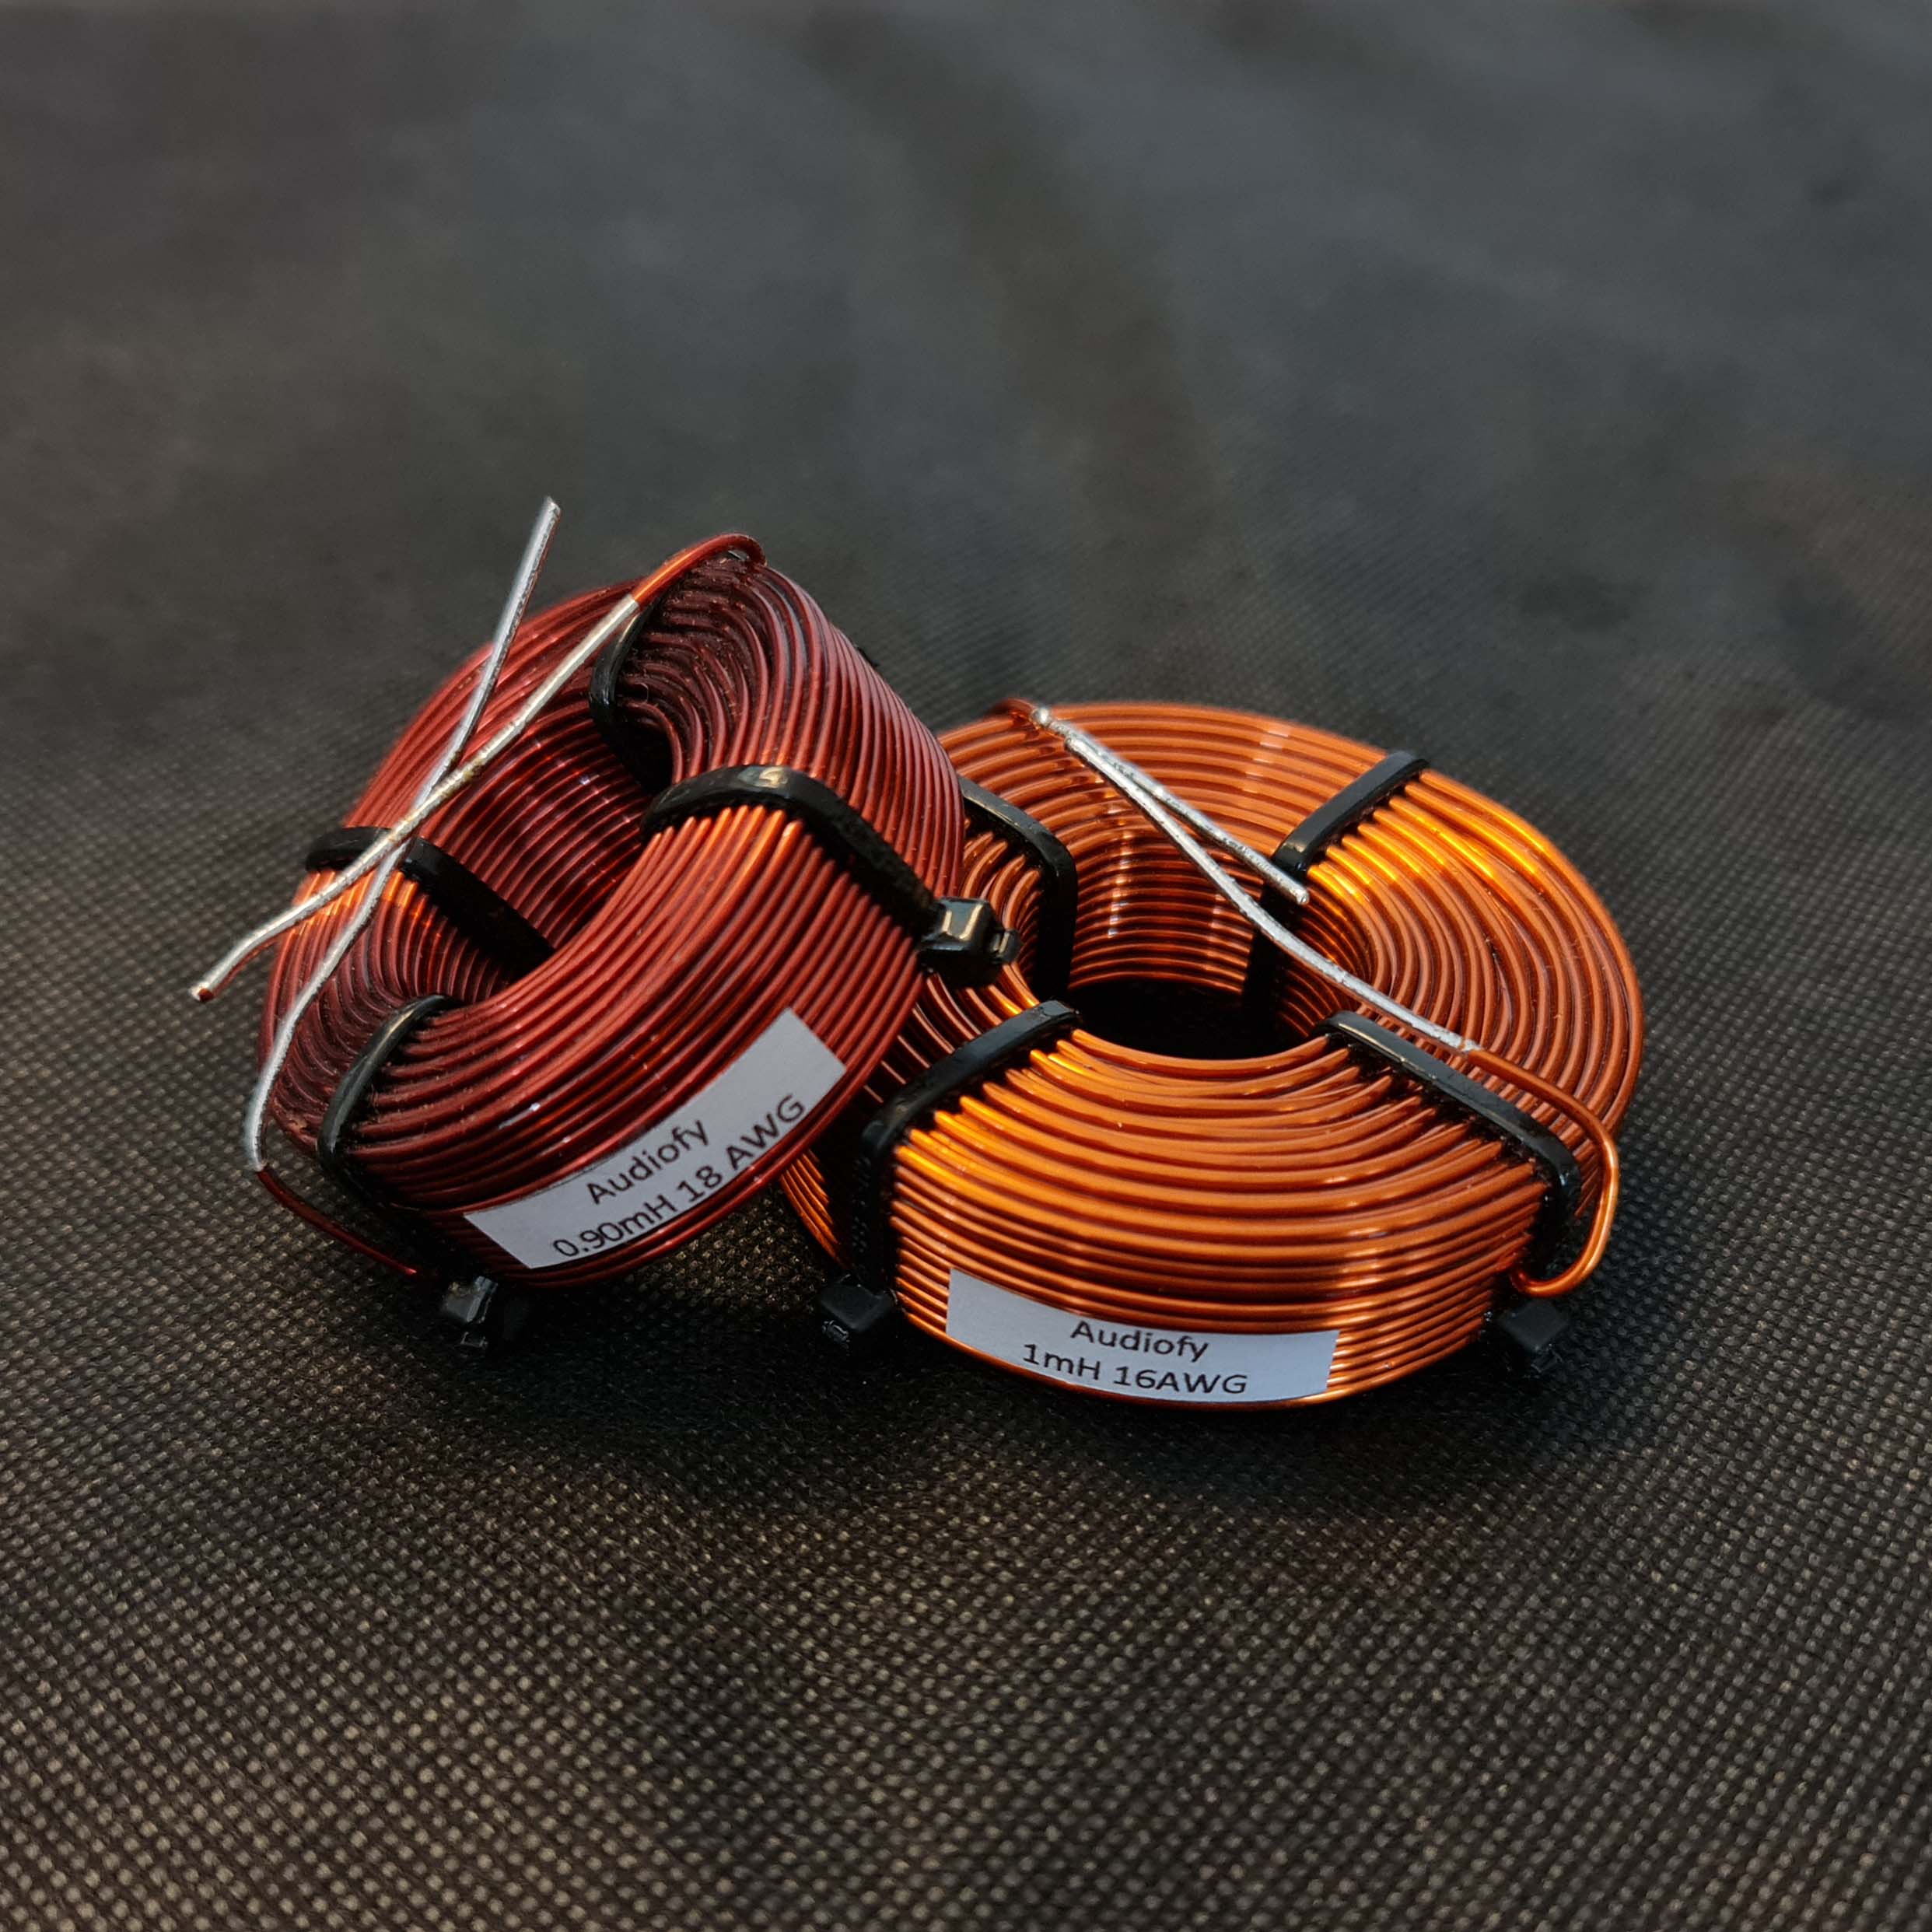 Audiofy 0.80mH 18 AWG Air Core Crossover Inductor